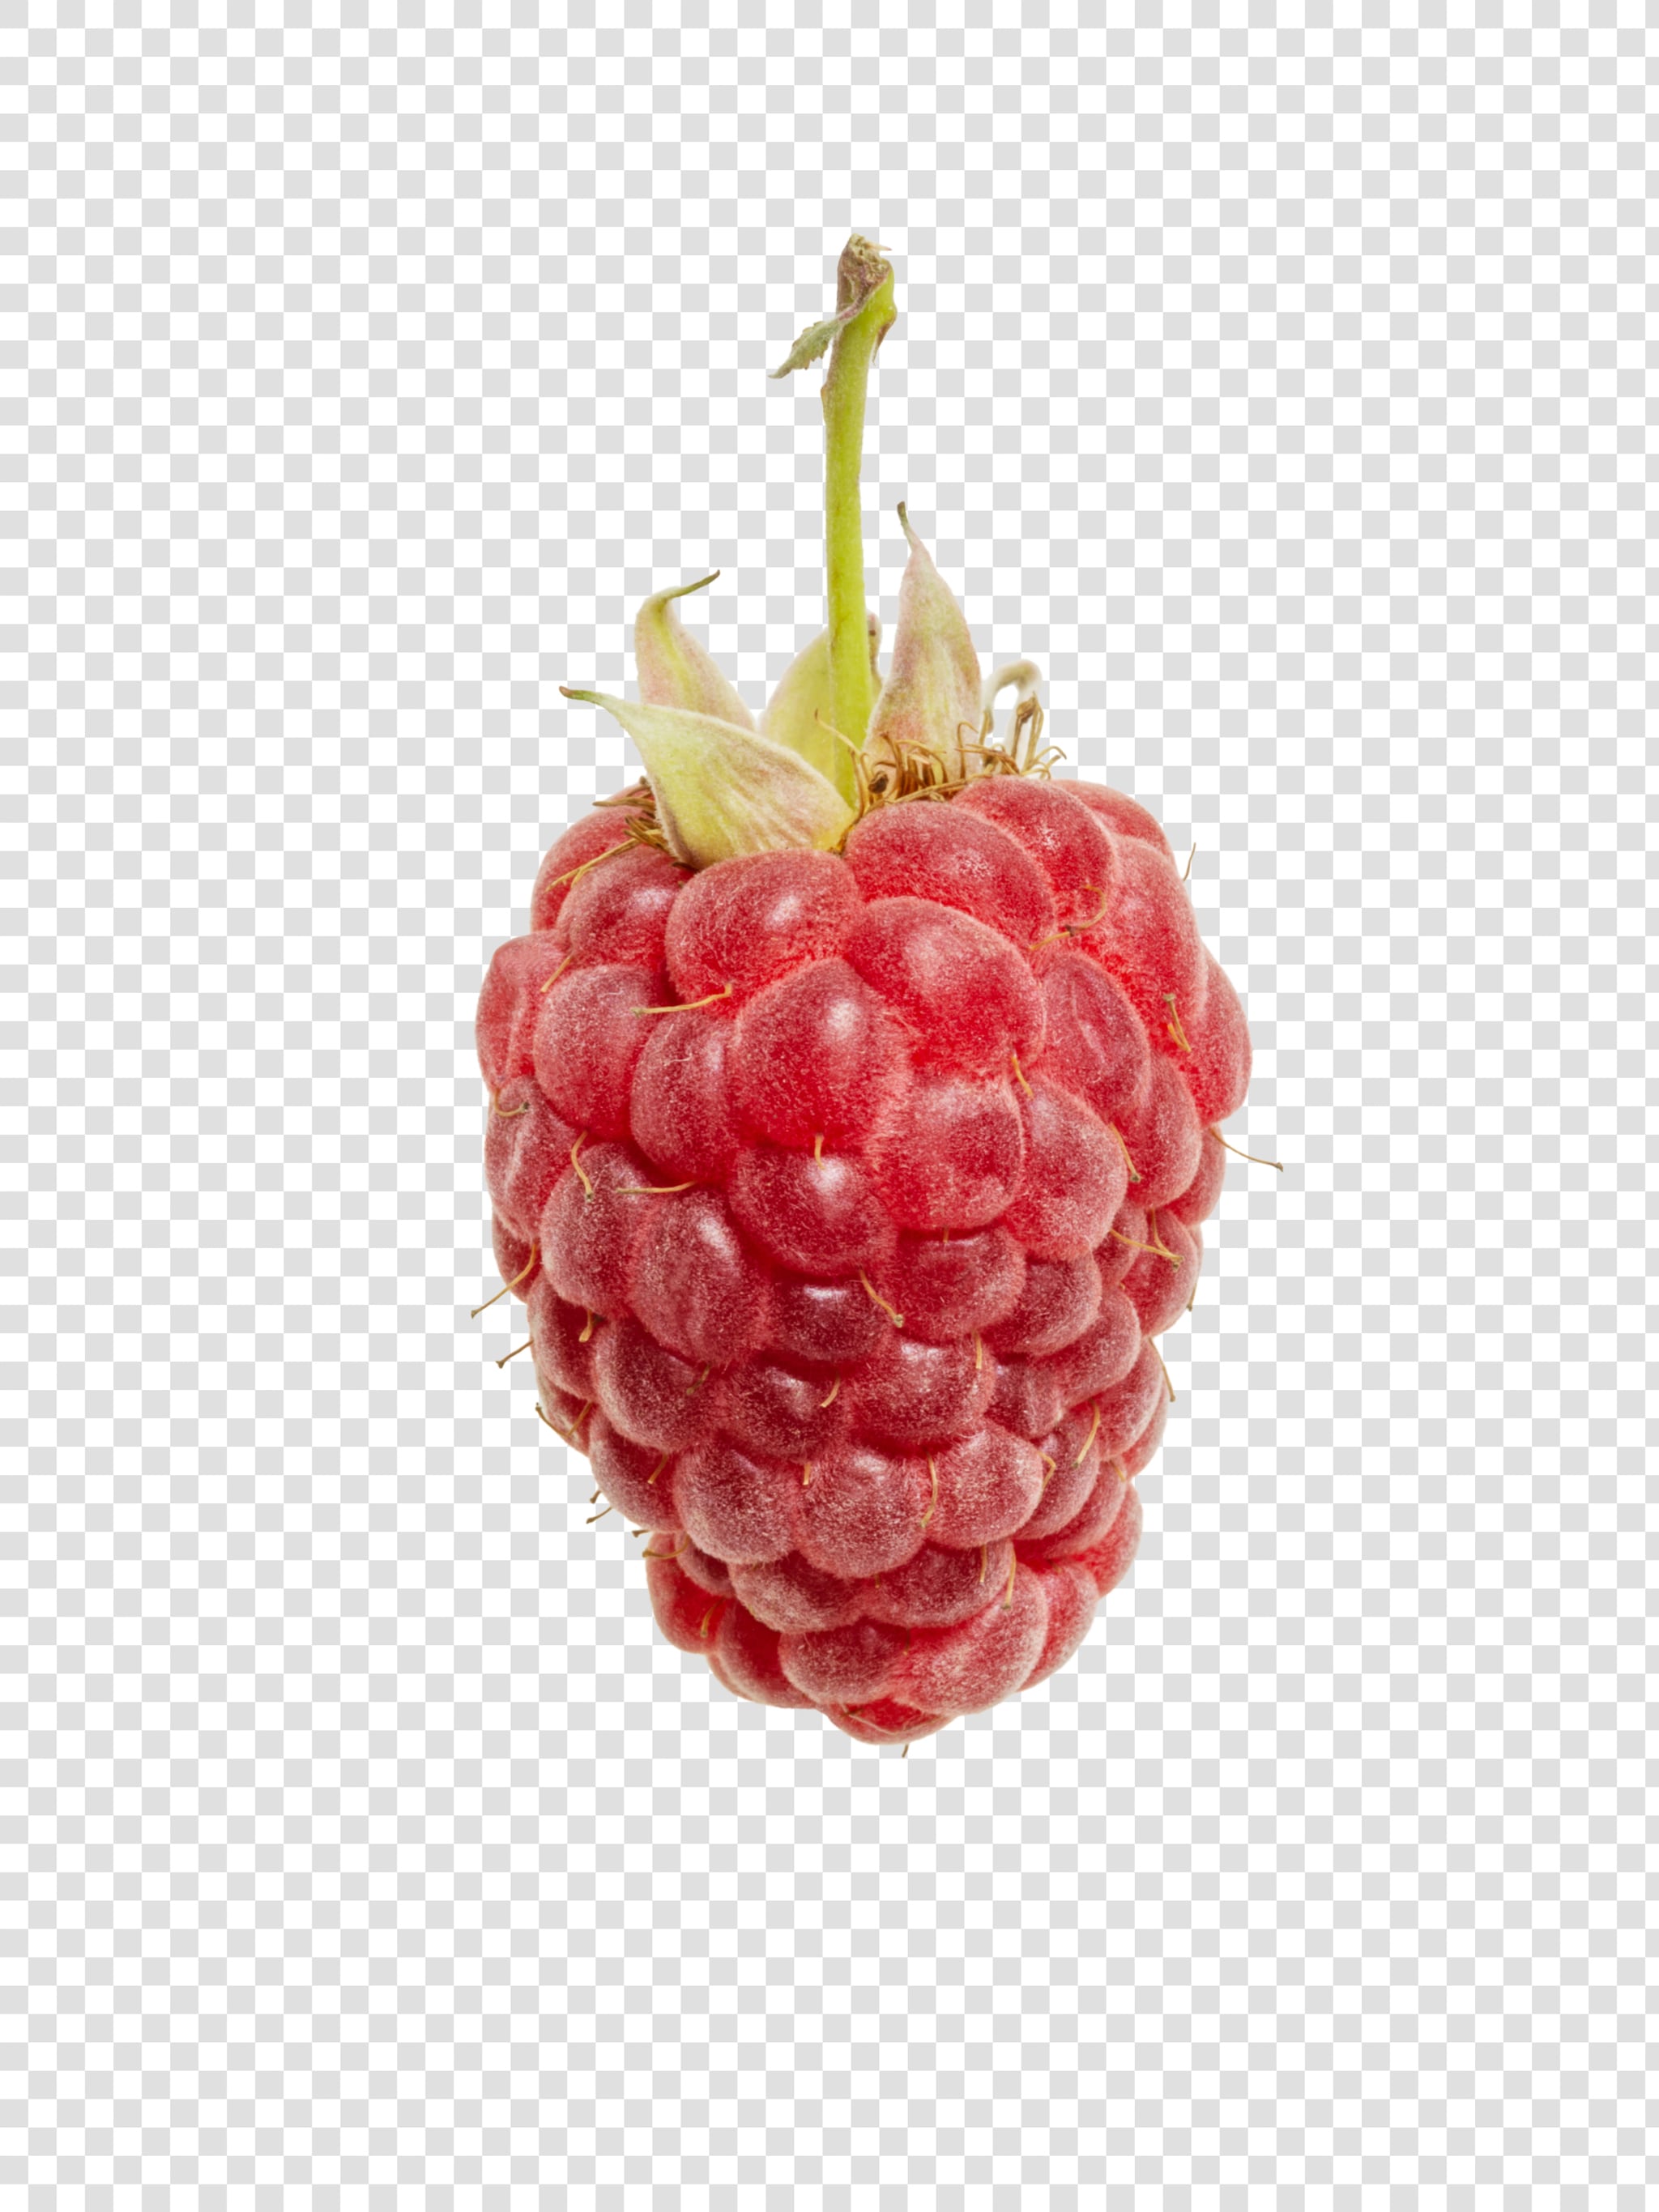 Clean Isolated PSD image of Raspberry on transparent background with separated shadow